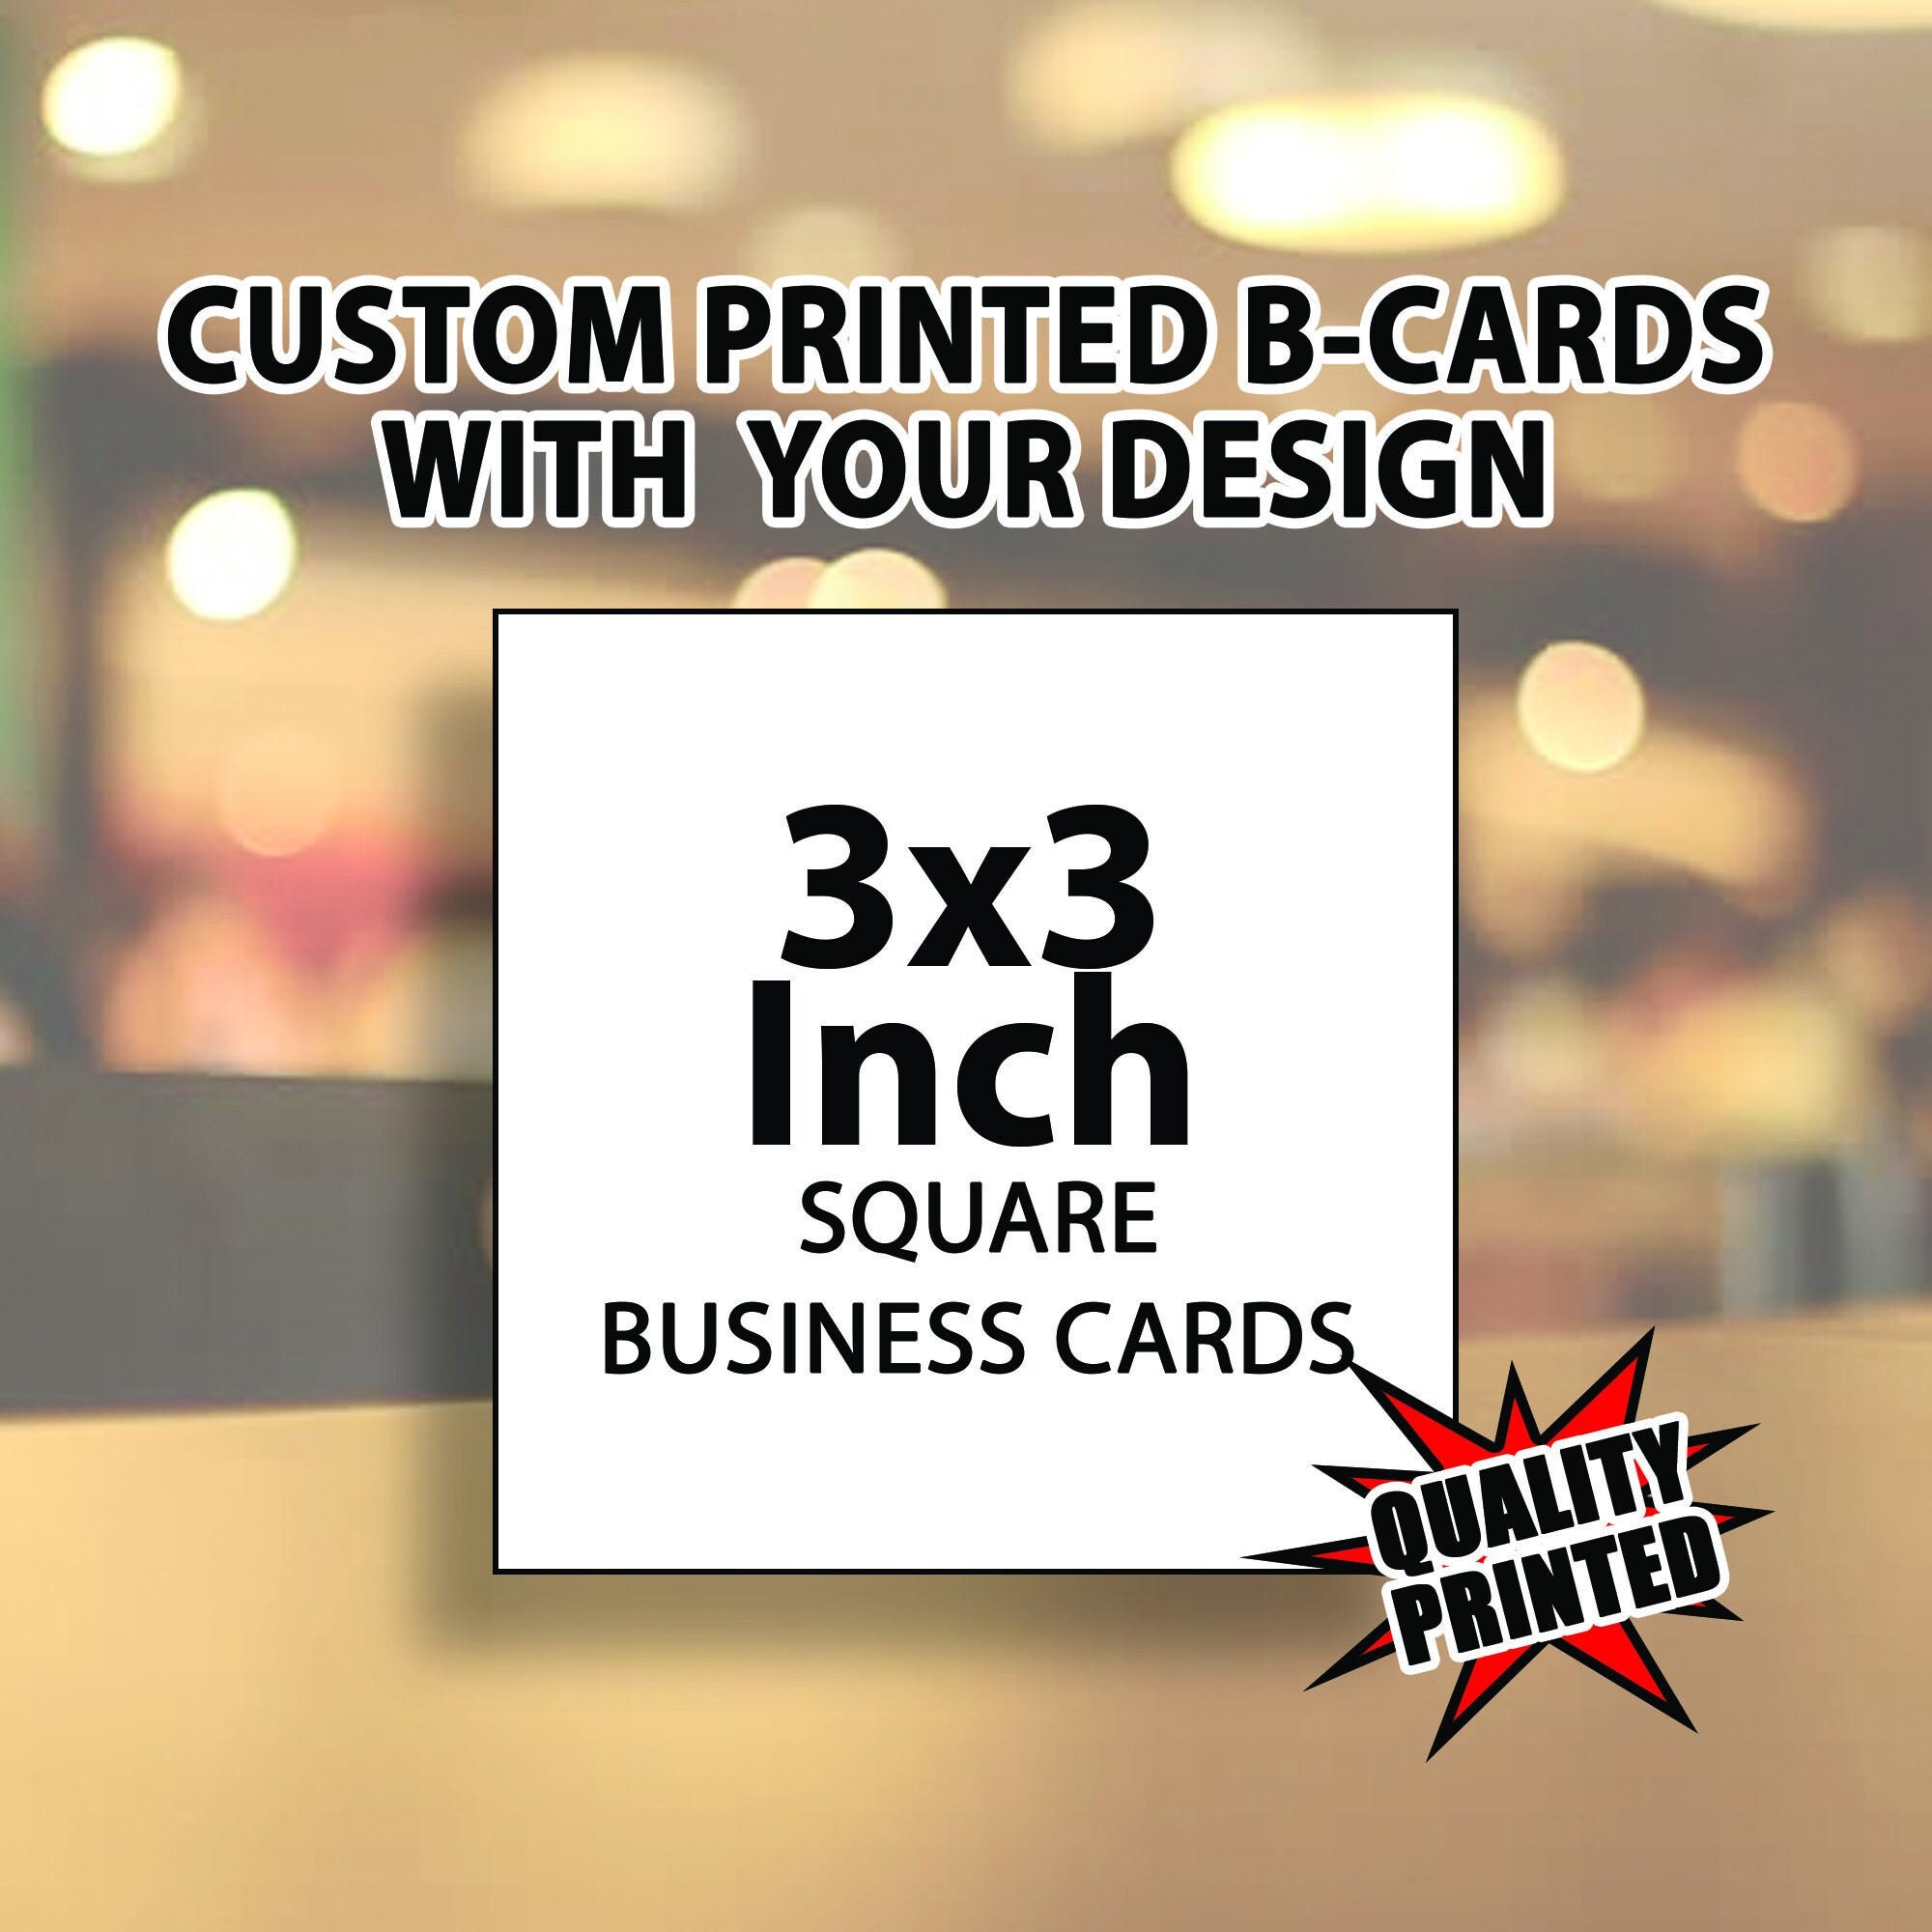 3x3 business cards 4